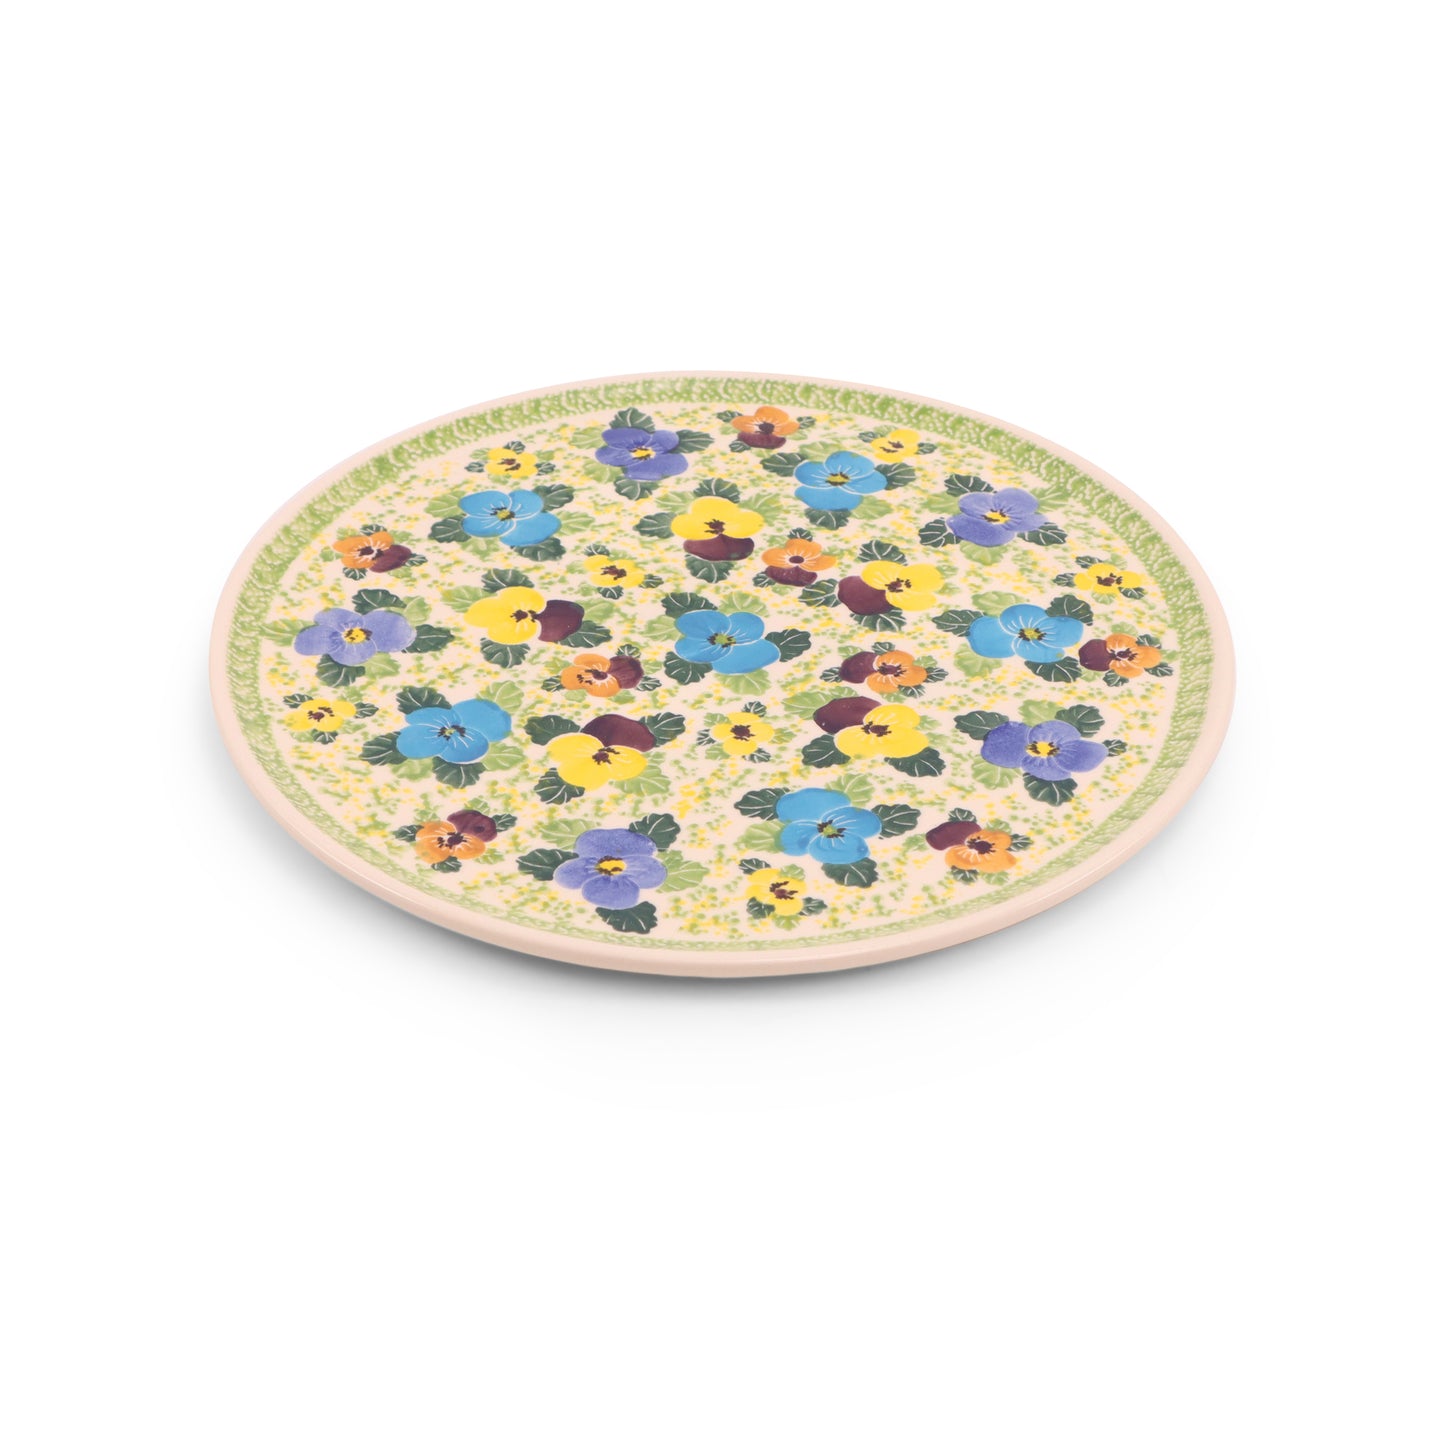 12" Pizza Plate. Pattern: Closing Time